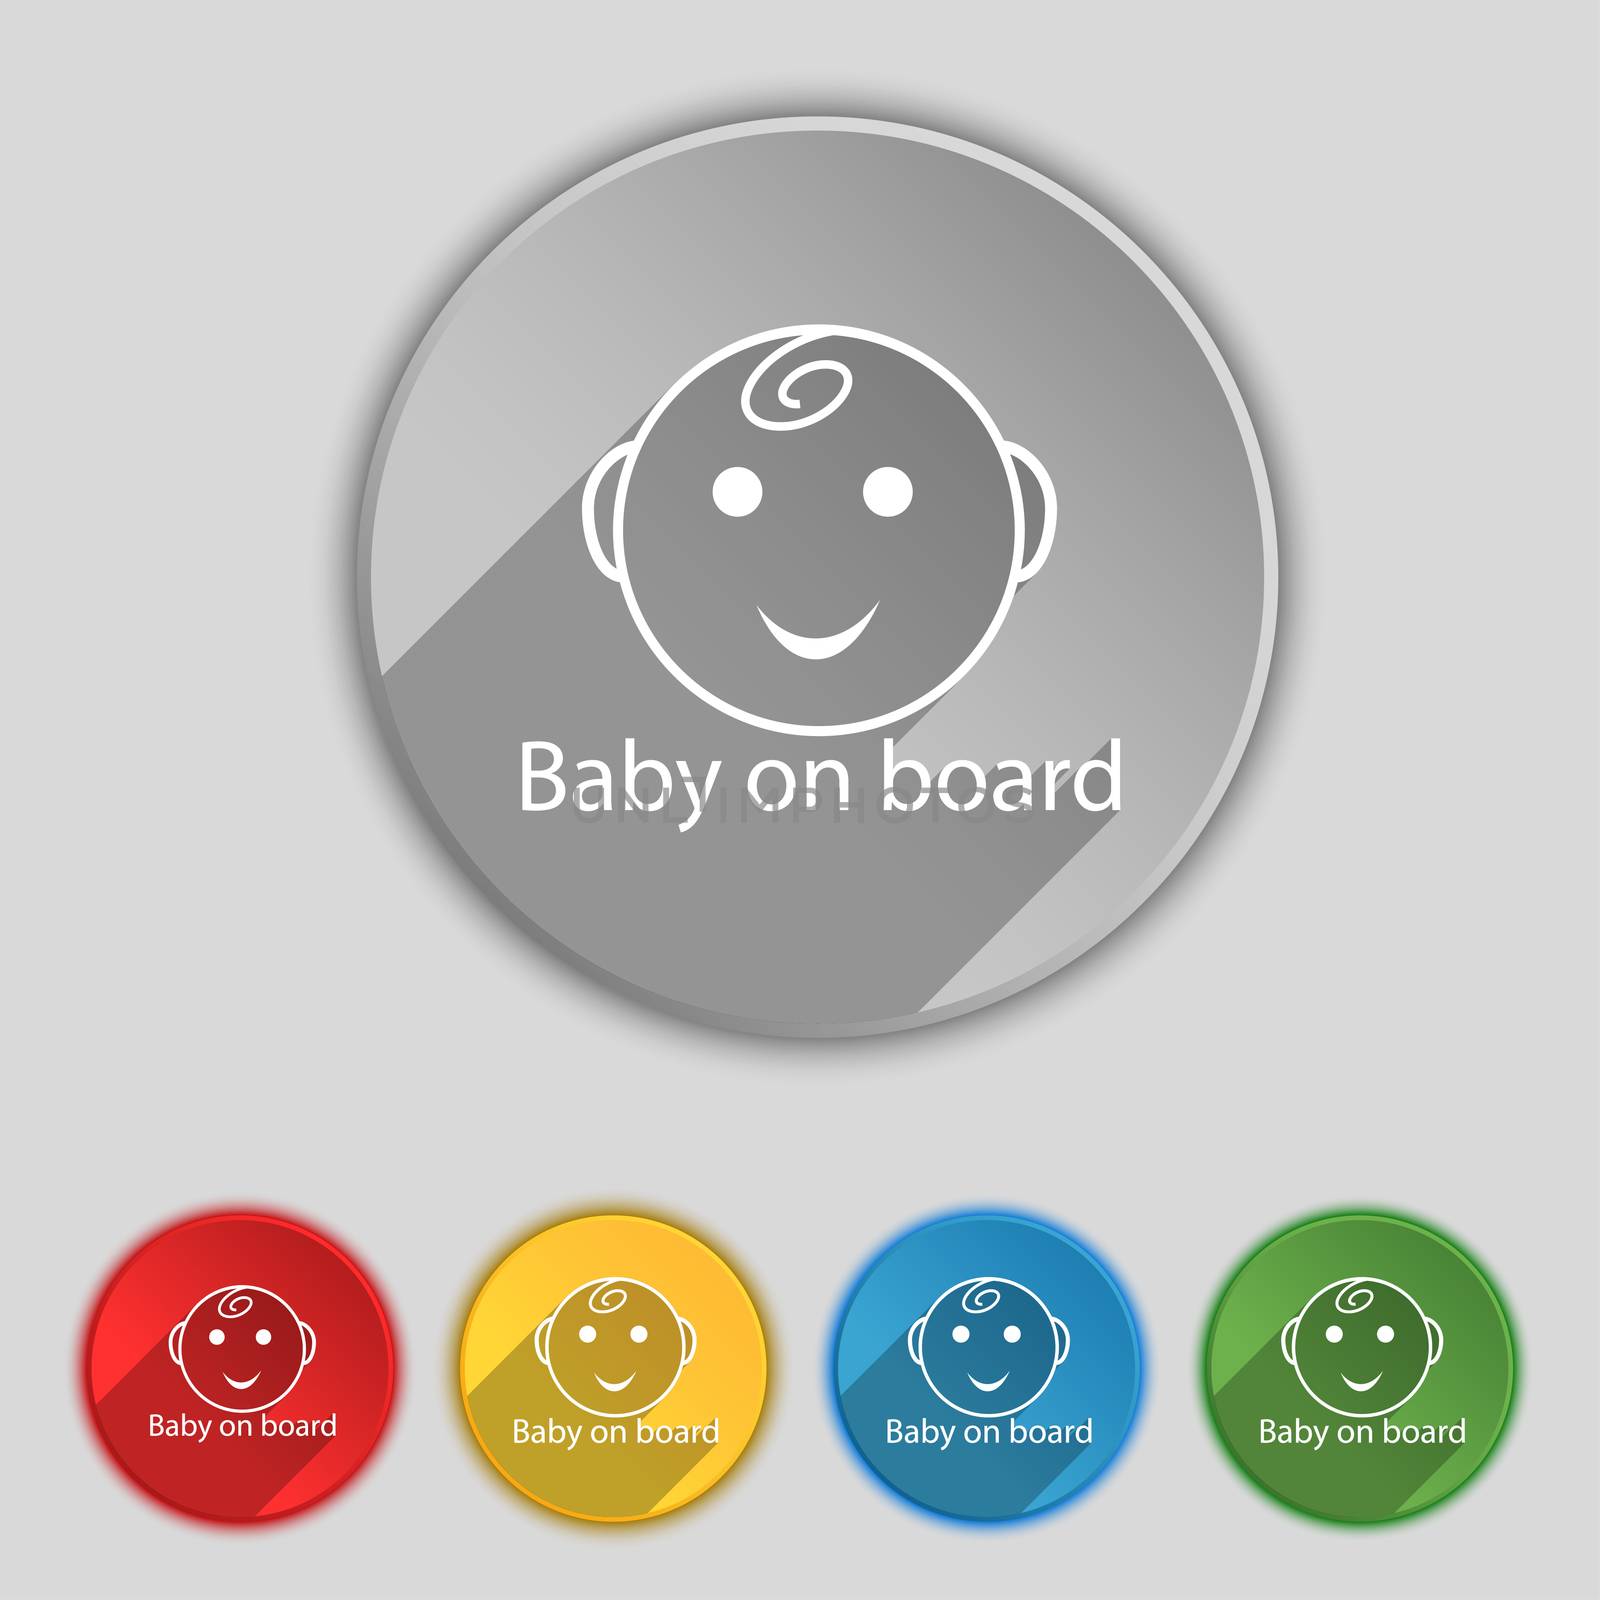 Baby on board sign icon. Infant in car caution symbol. Set of colored buttons.  by serhii_lohvyniuk